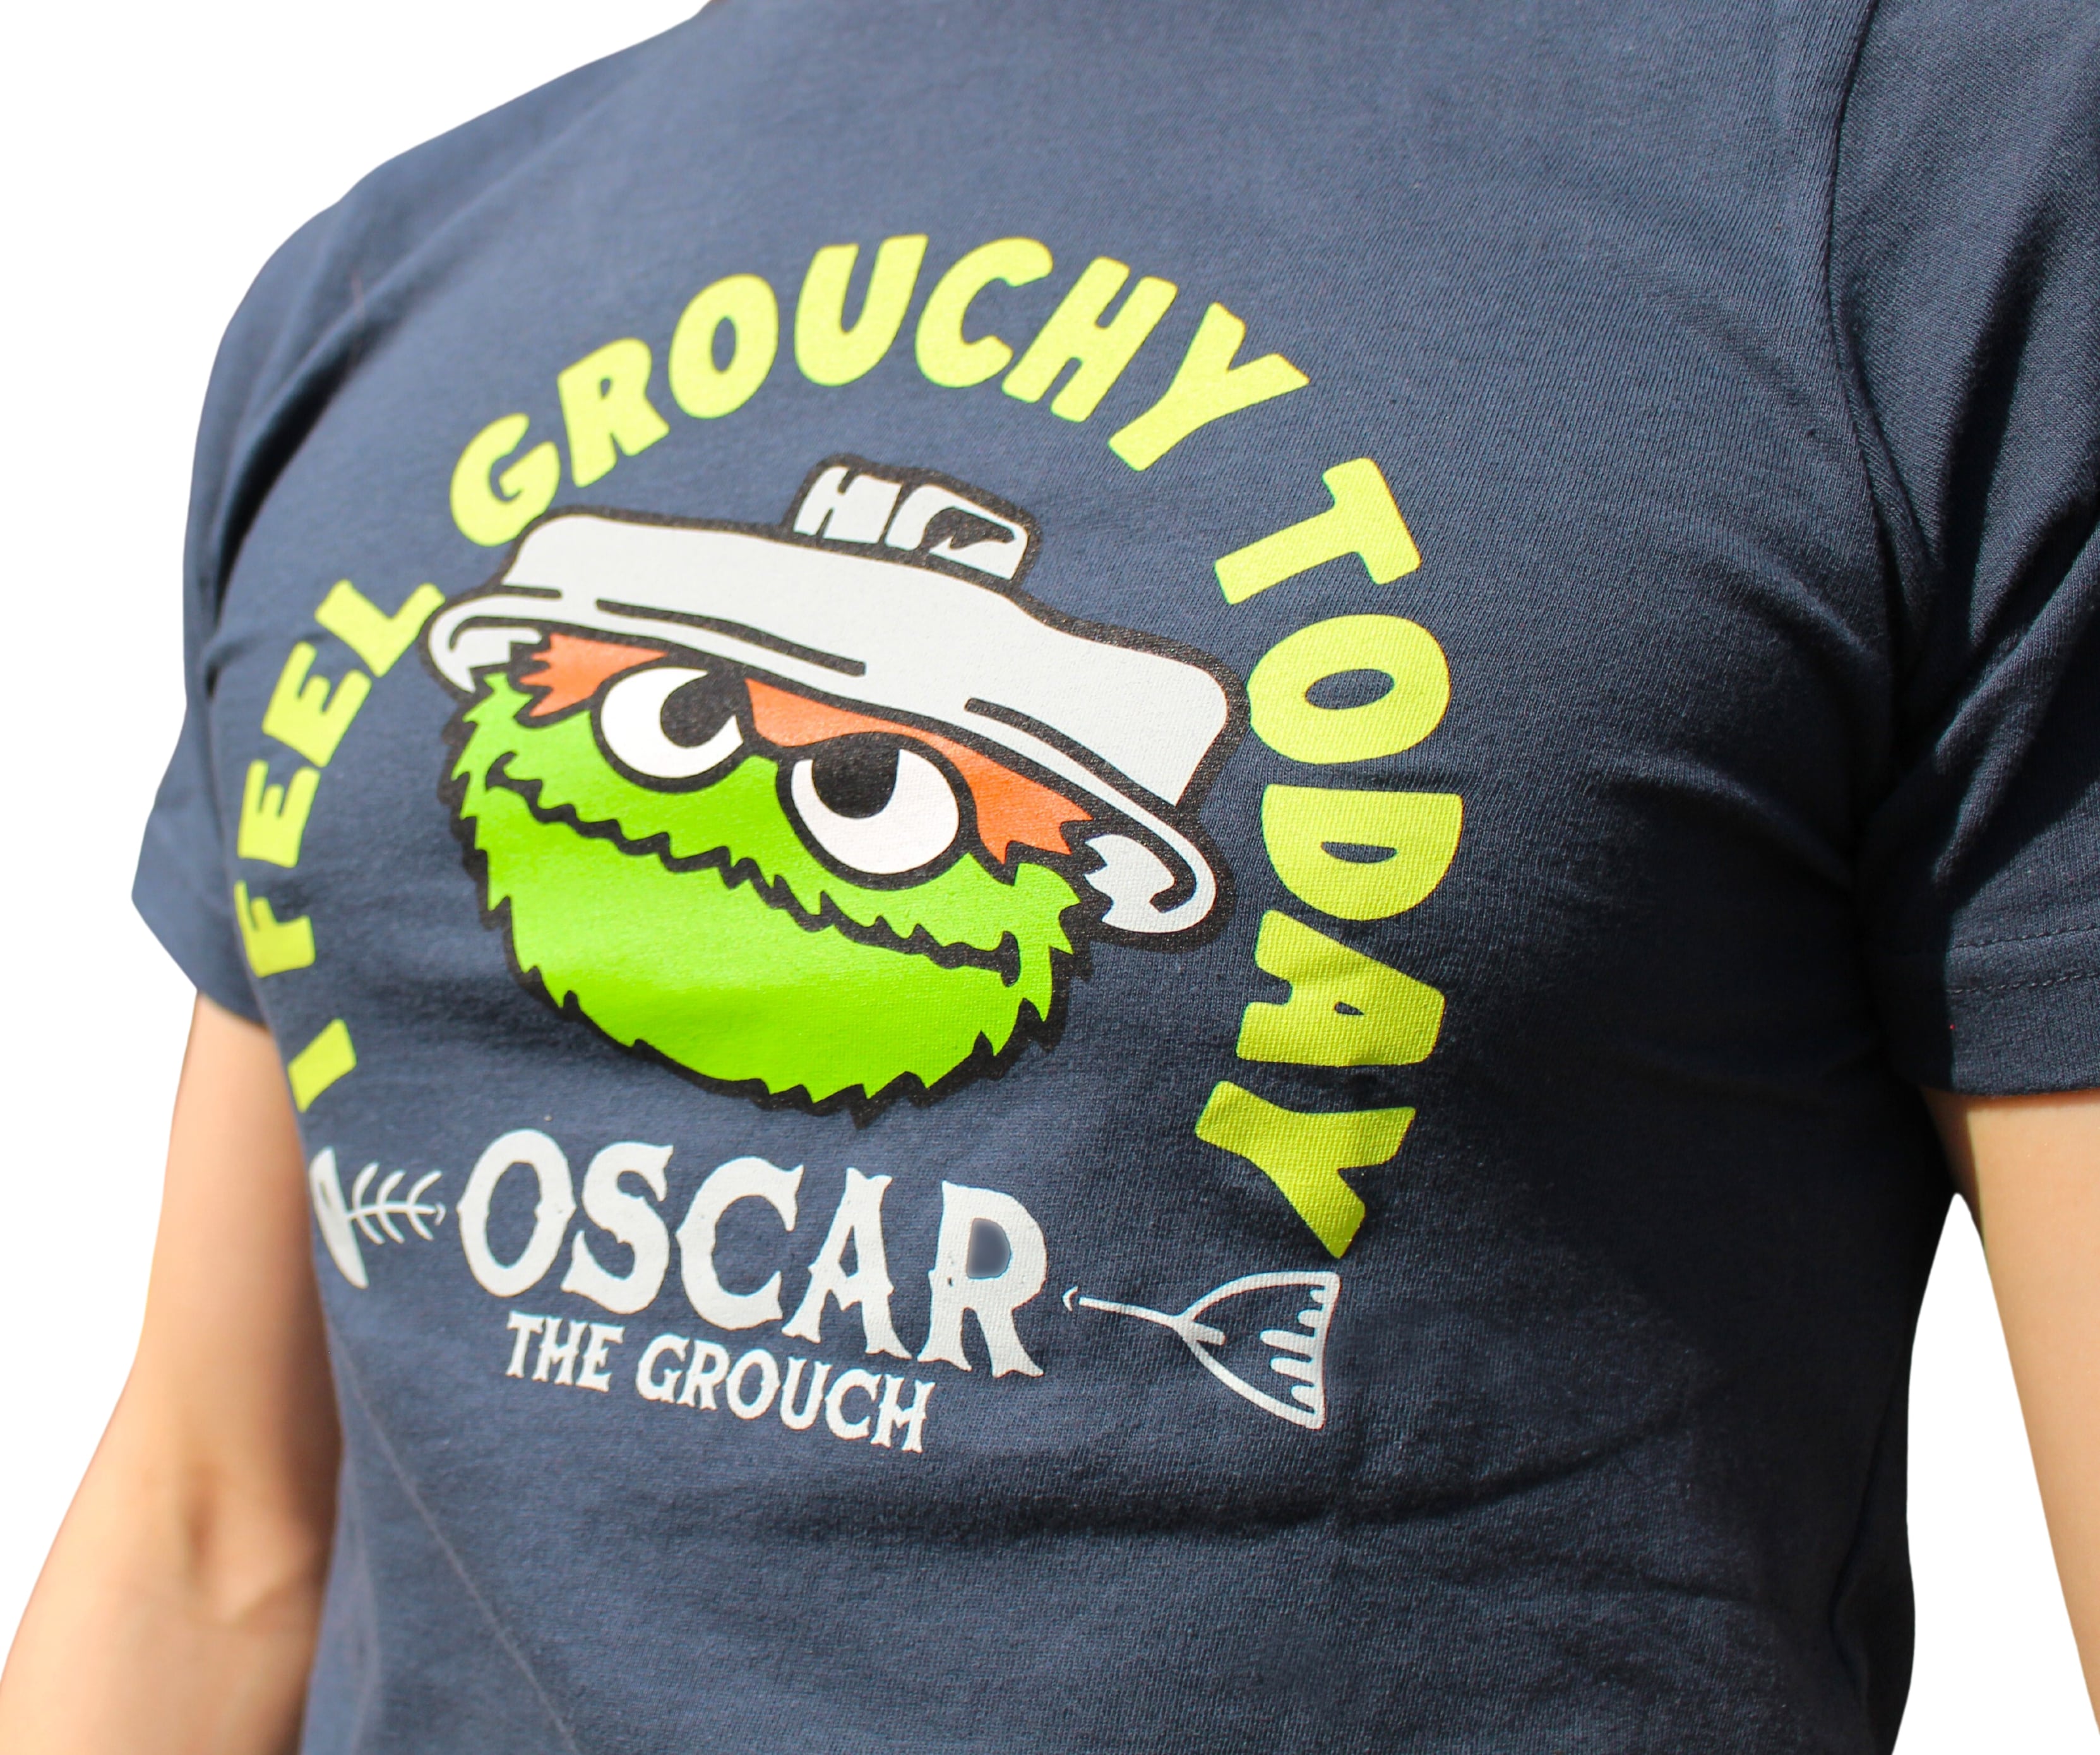 I Feel Grouchy Shirt on model front view close up of graphic and text